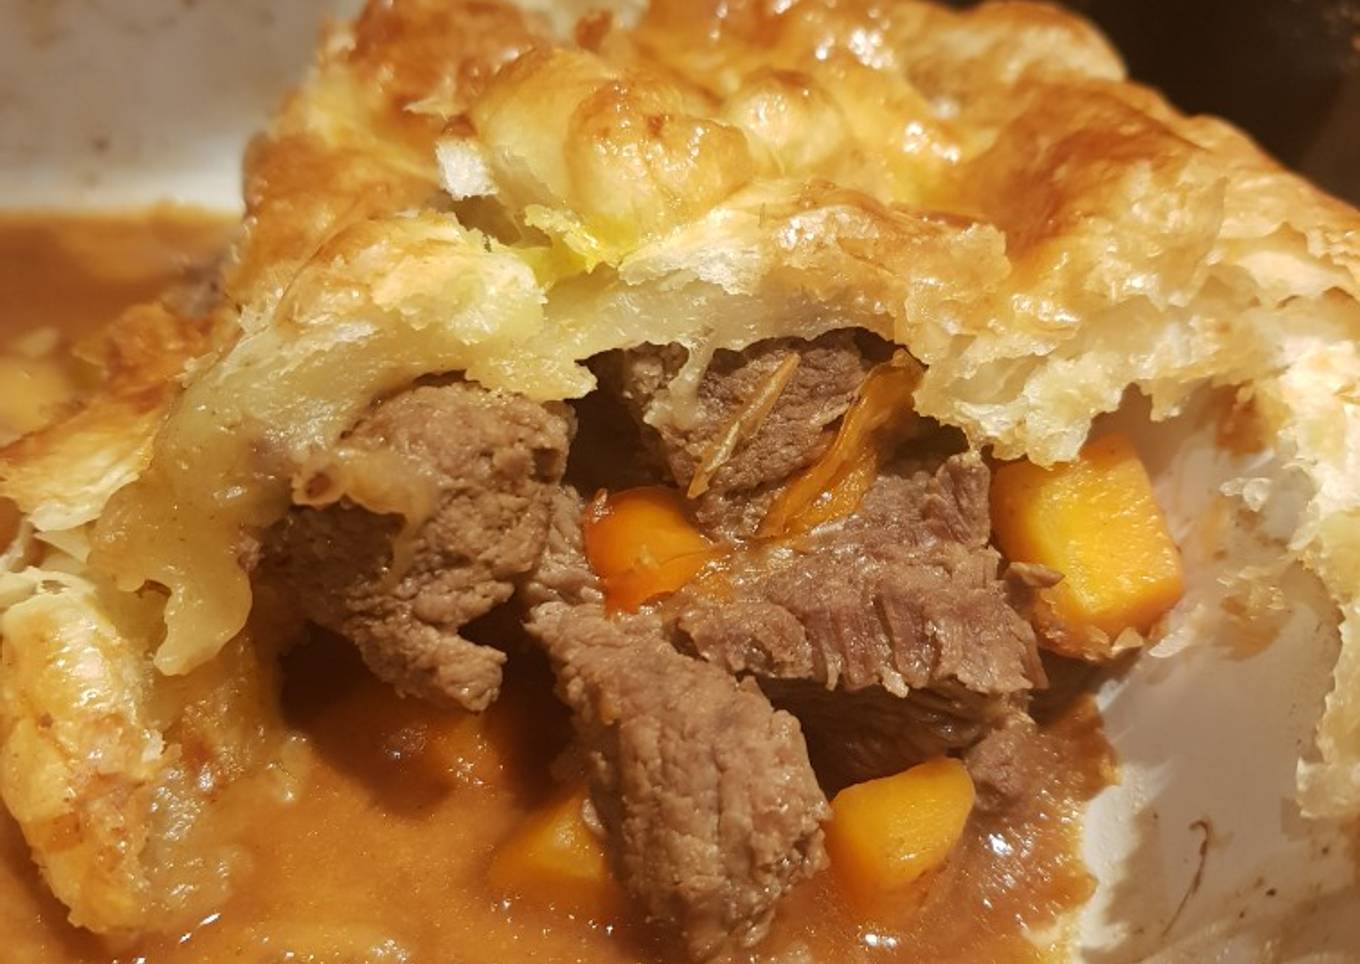 Beef and ale pie